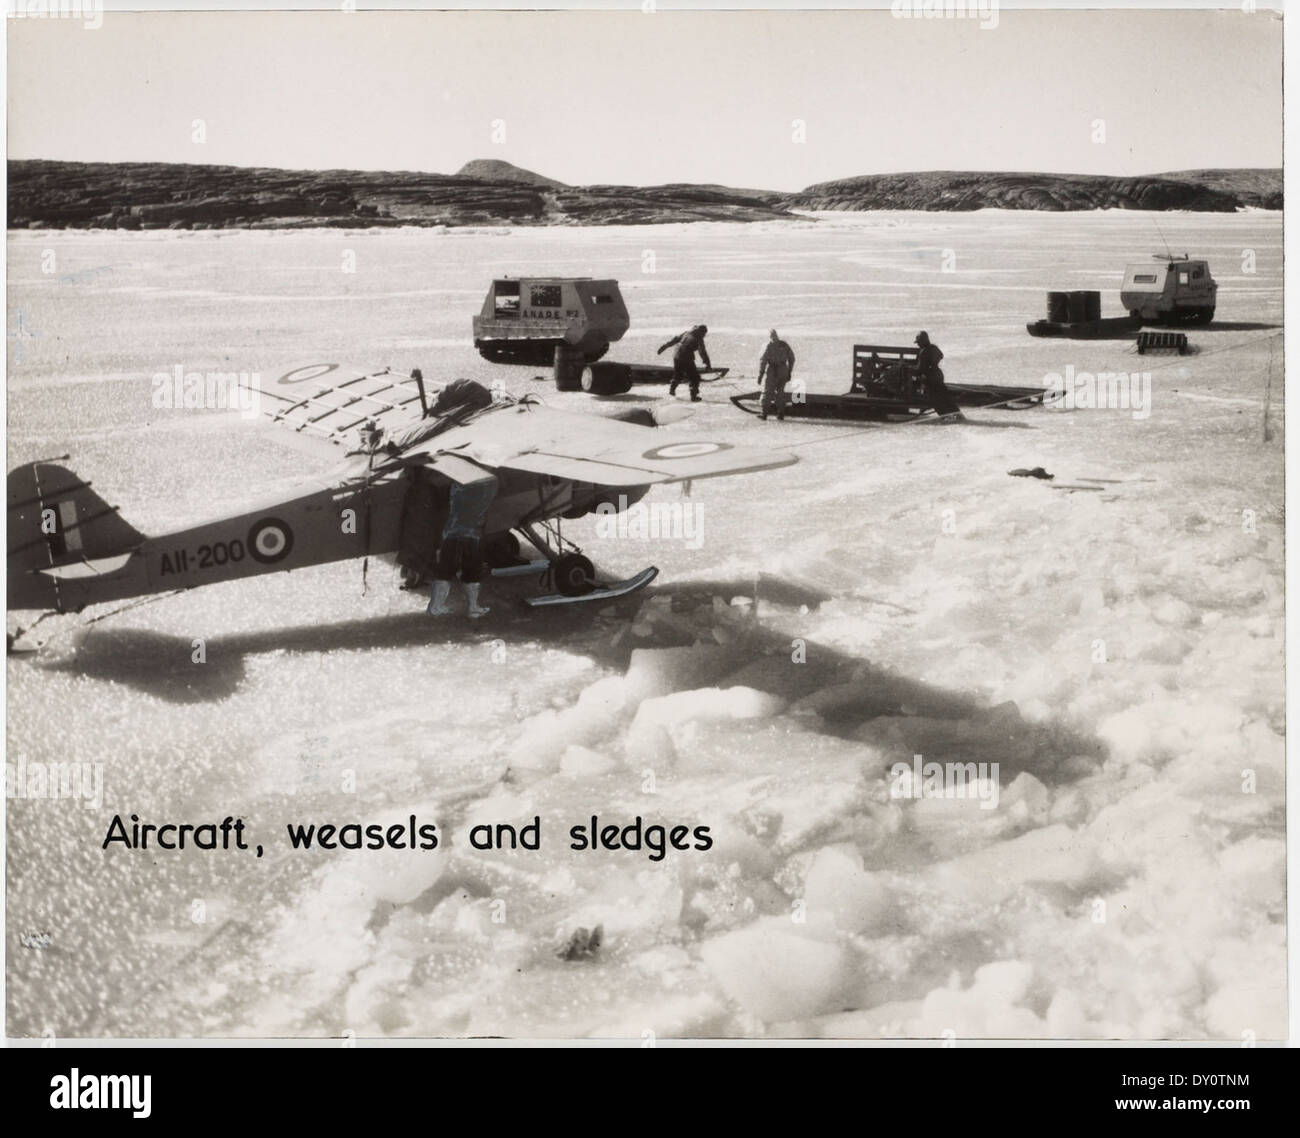 Auster aircraft fitted with skis, weasels and sledges on the fast ice near the Mawson Station in Antarctica Stock Photo